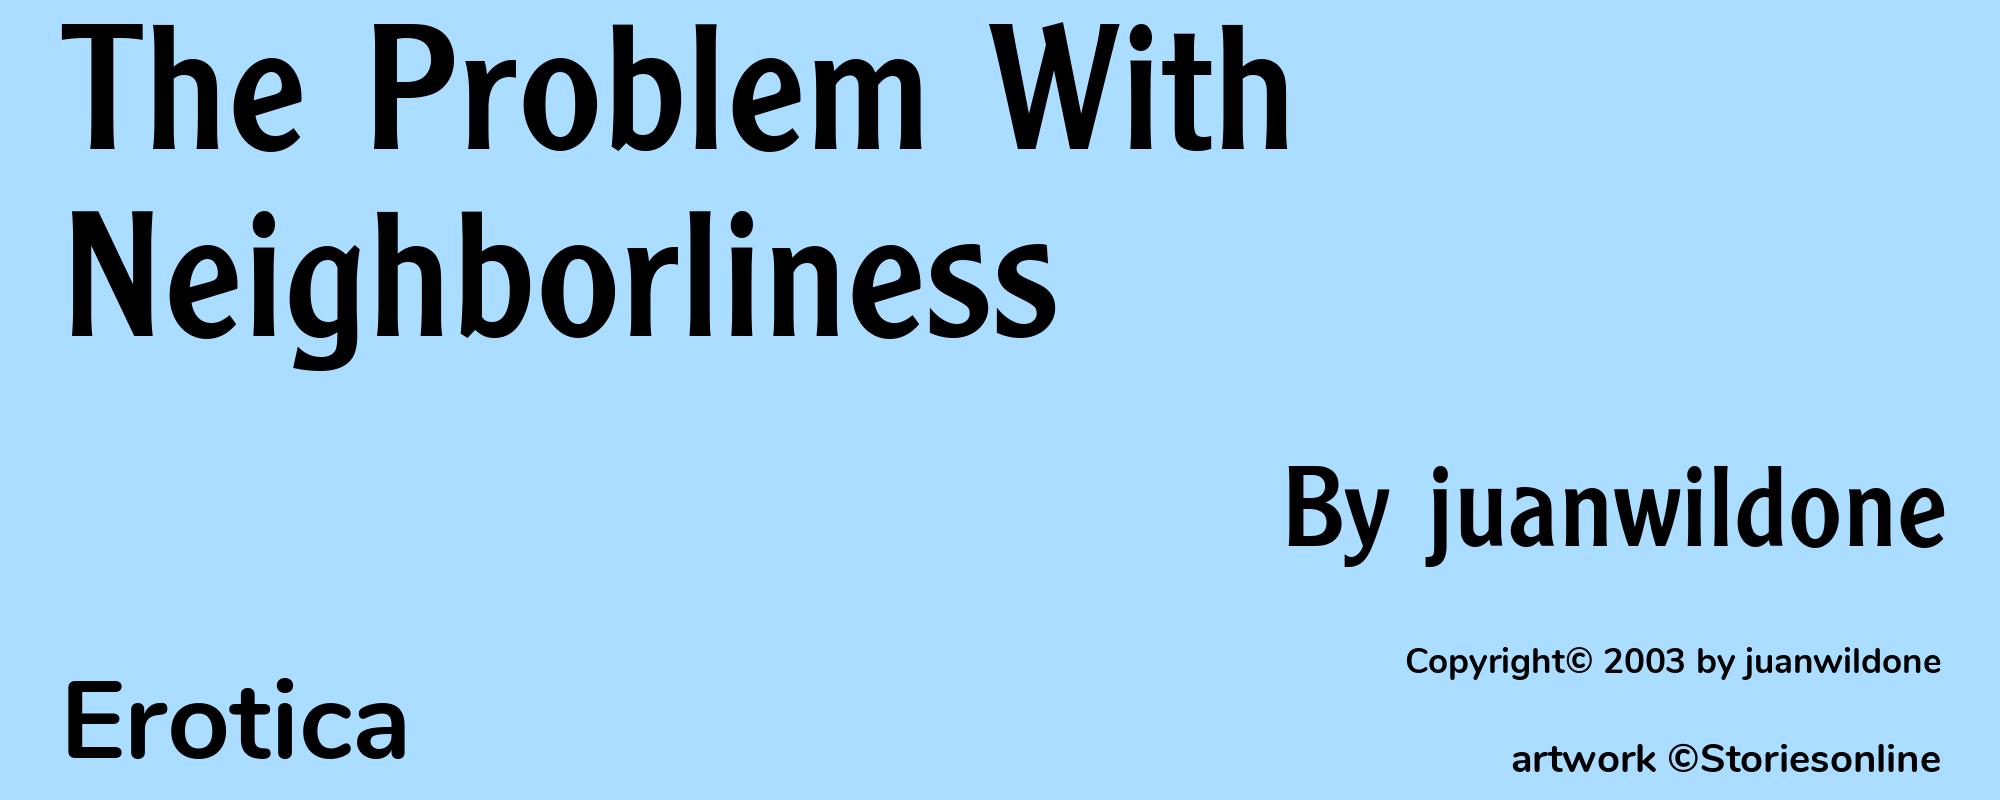 The Problem With Neighborliness - Cover